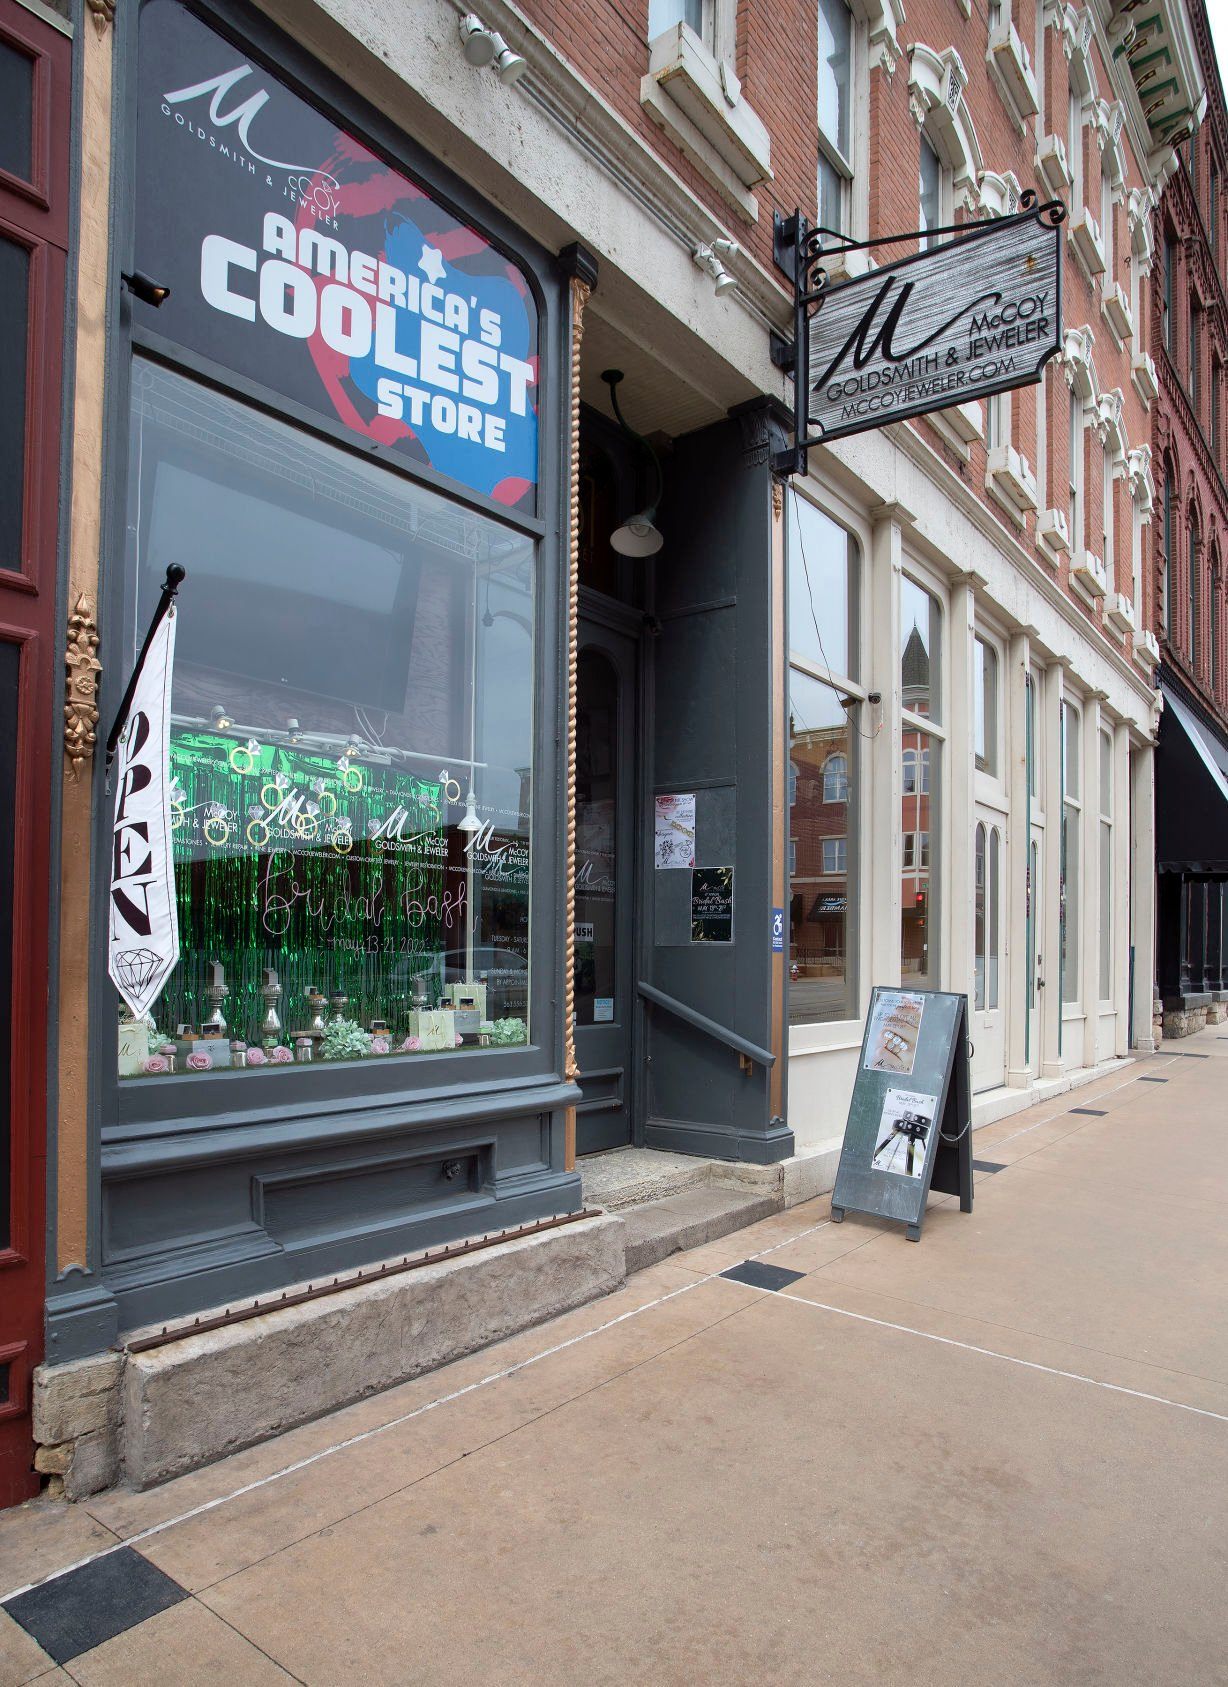 Exterior of McCoy Goldsmith & Jeweler in Dubuque on Thursday, May 5, 2022.    PHOTO CREDIT: Stephen Gassman